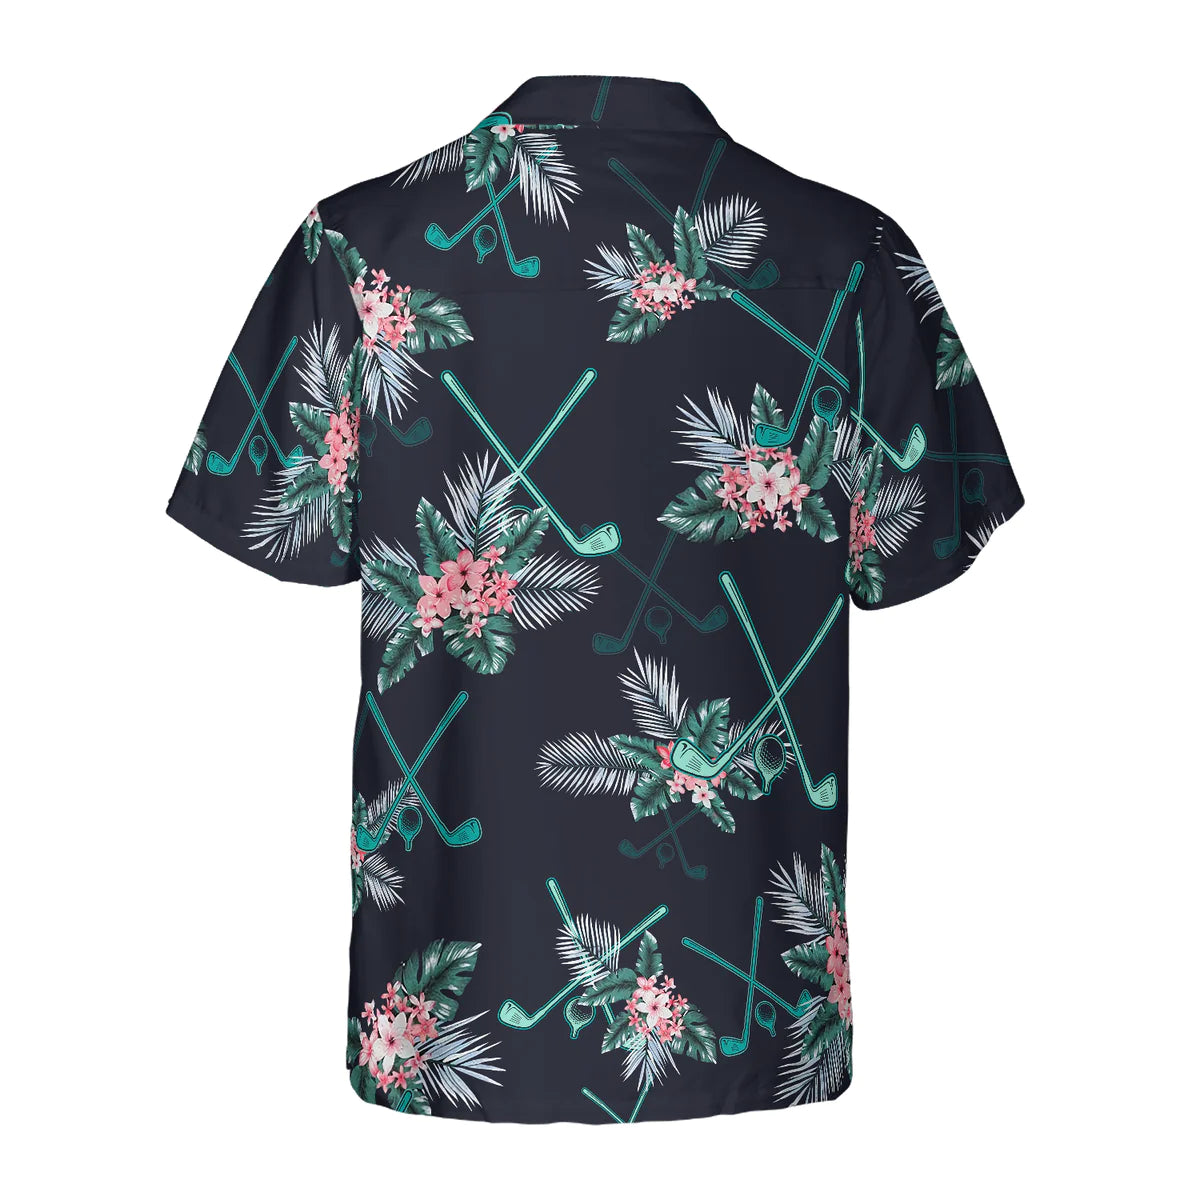 Hawaiian Sport Shirt with Golf Design: Perfect Gift for Men who Love the Tropics – GH002